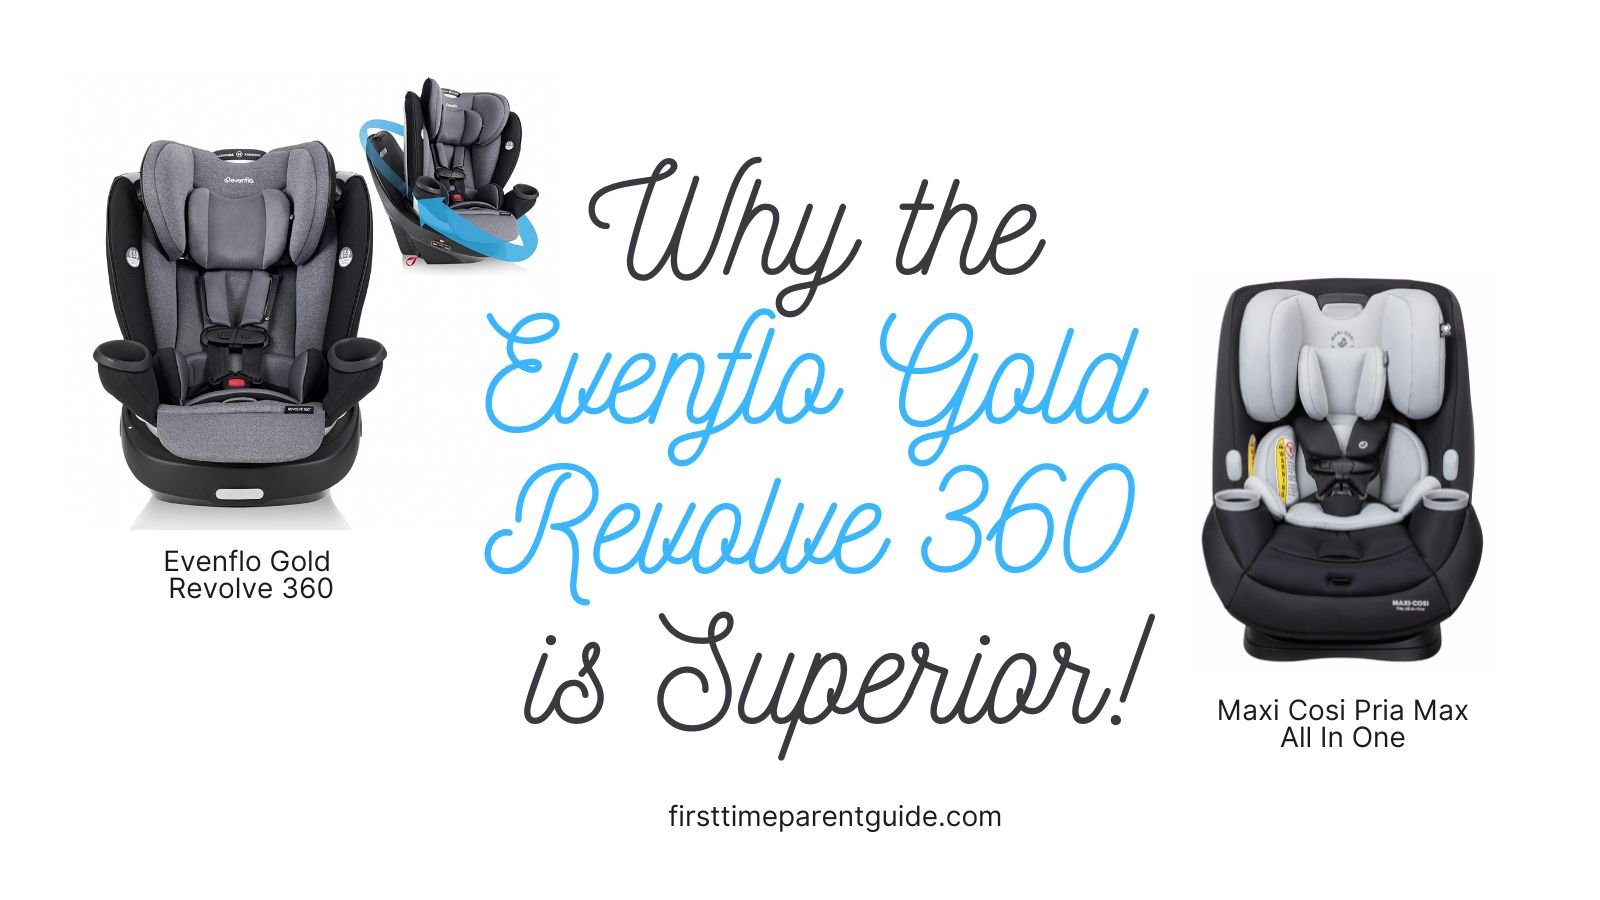 The Evenflo Gold Revolve 360 Or